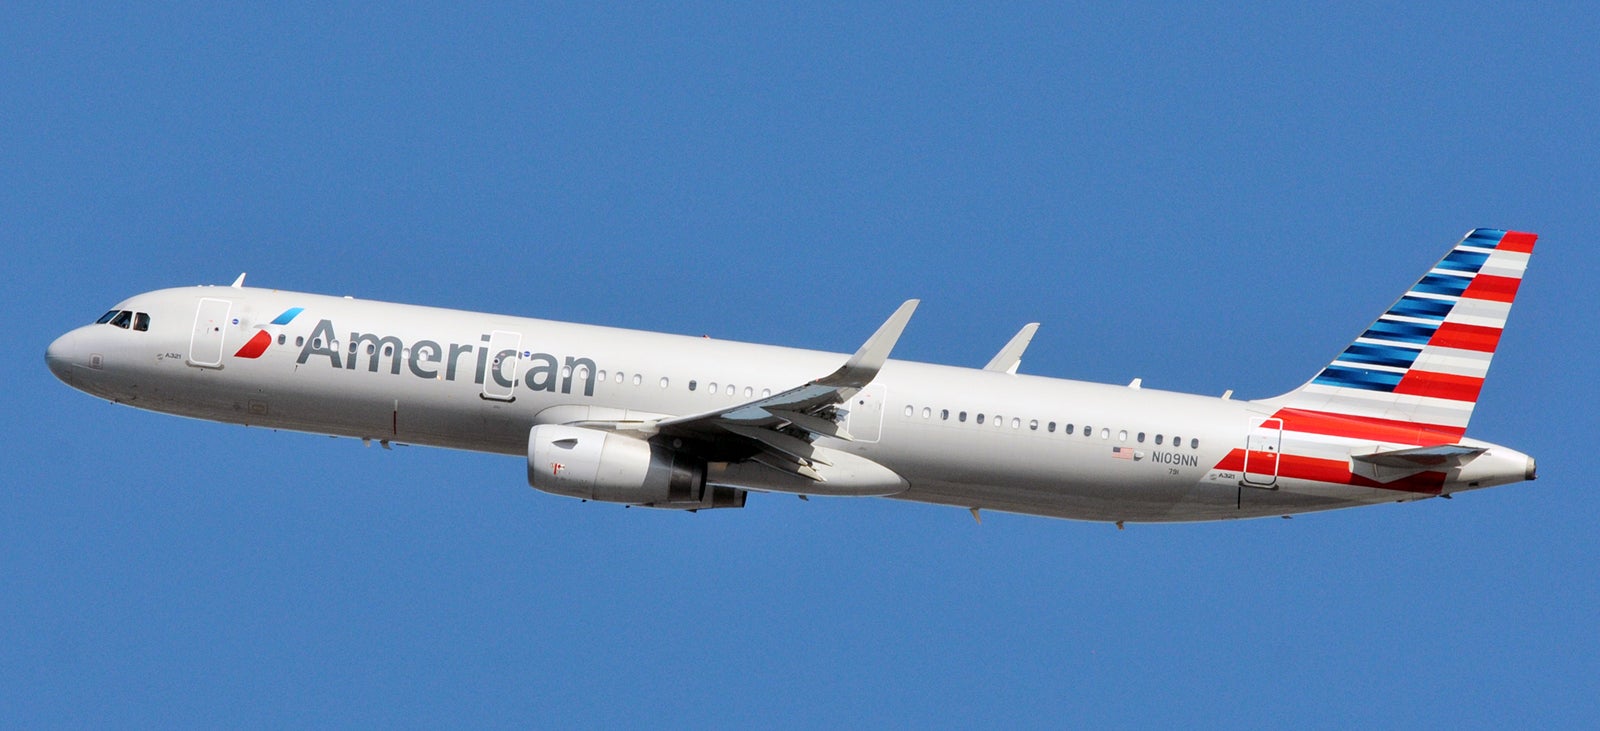 American Airlines A321 in flight